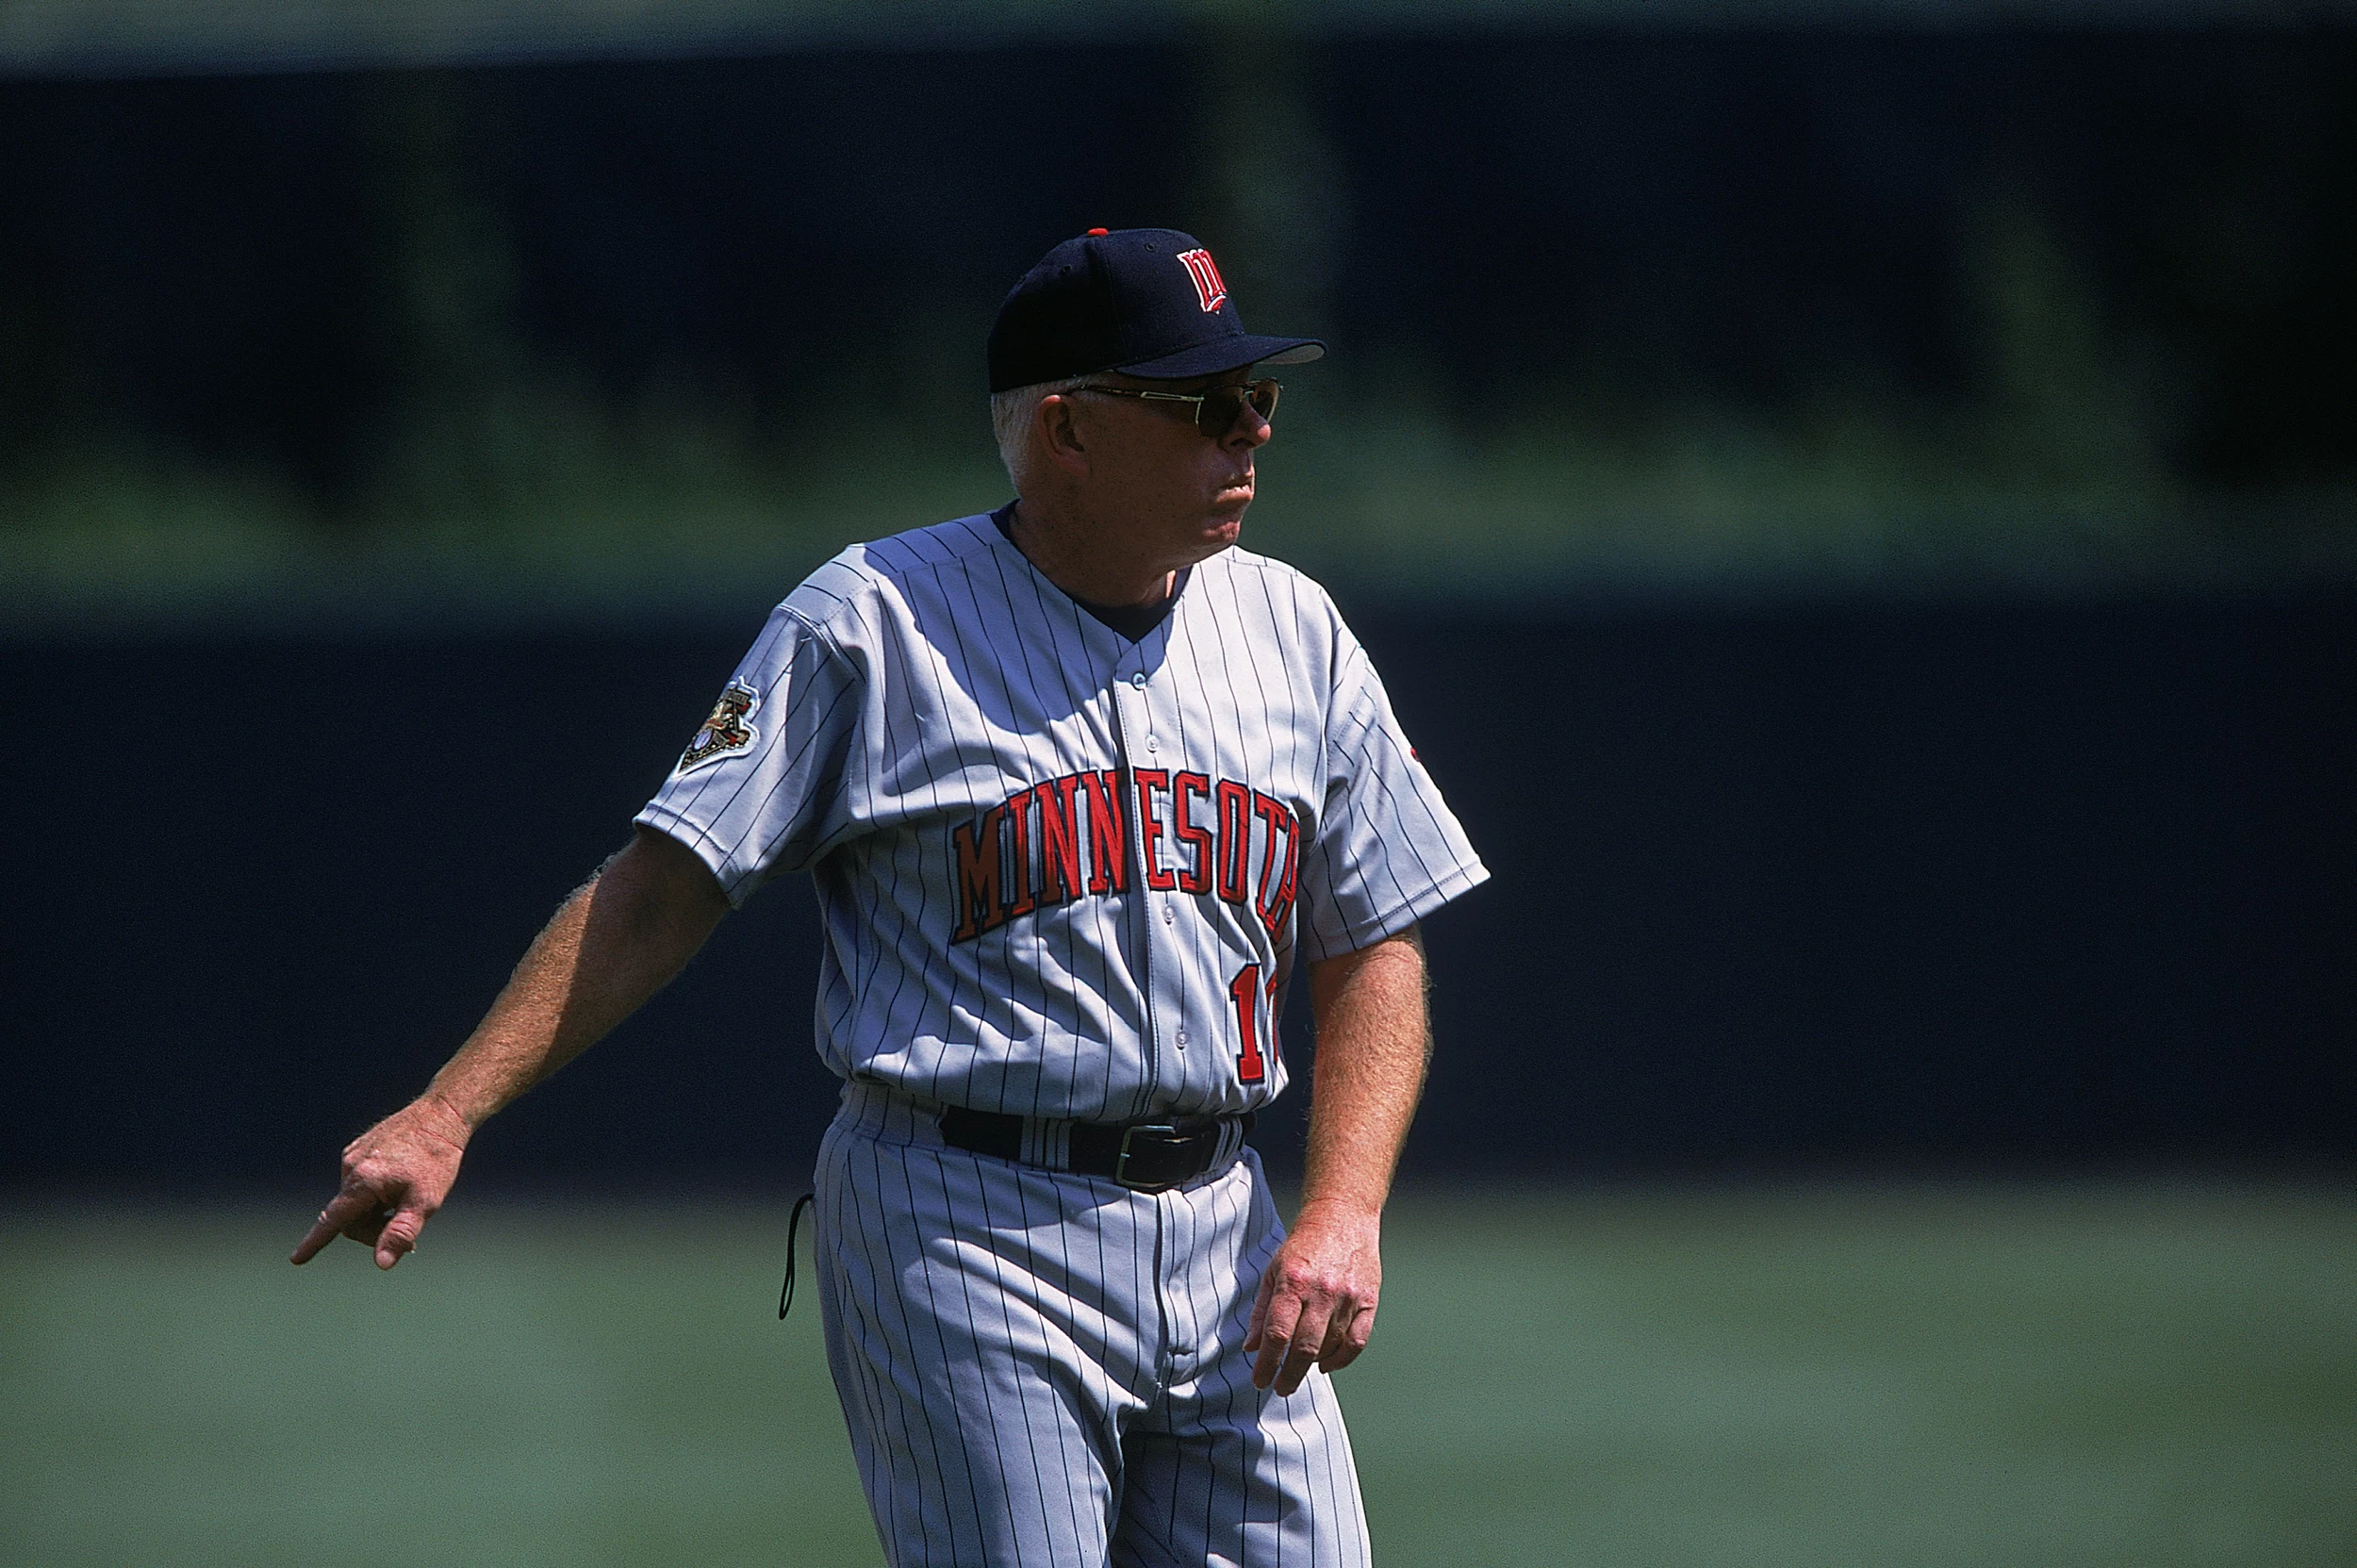 Hrbek will become the next to go bronze at Target Field